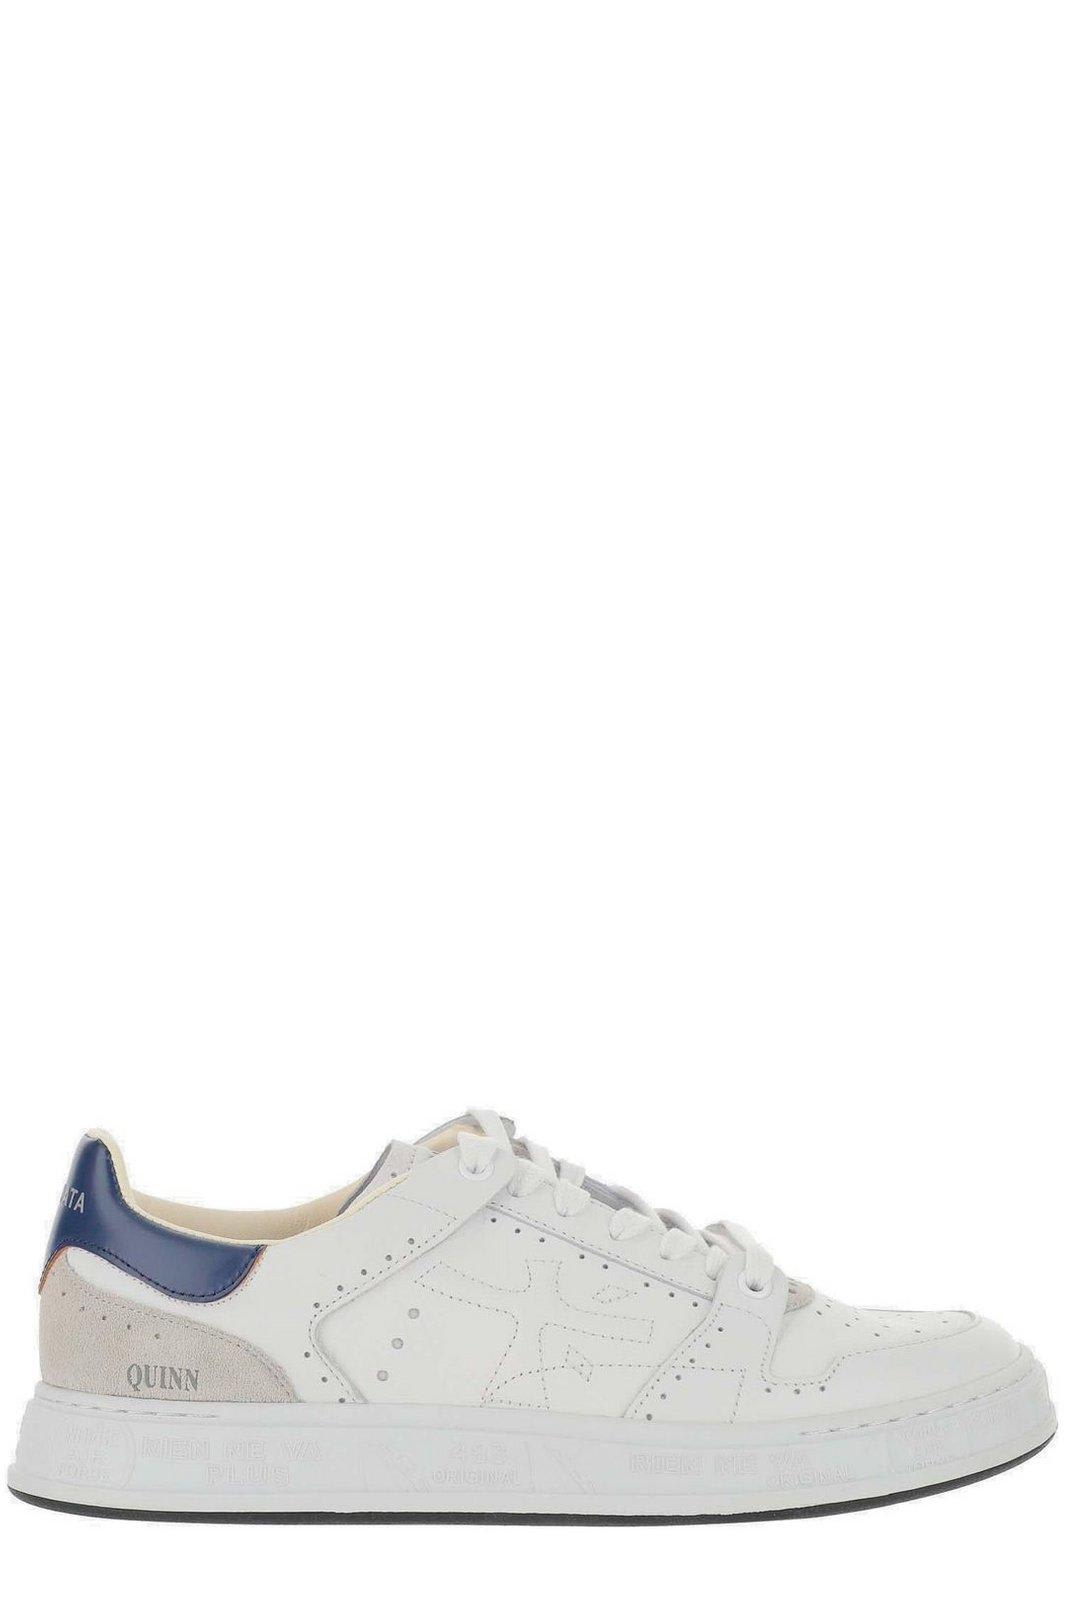 Premiata Quinn Lace-up Sneakers In Bianco